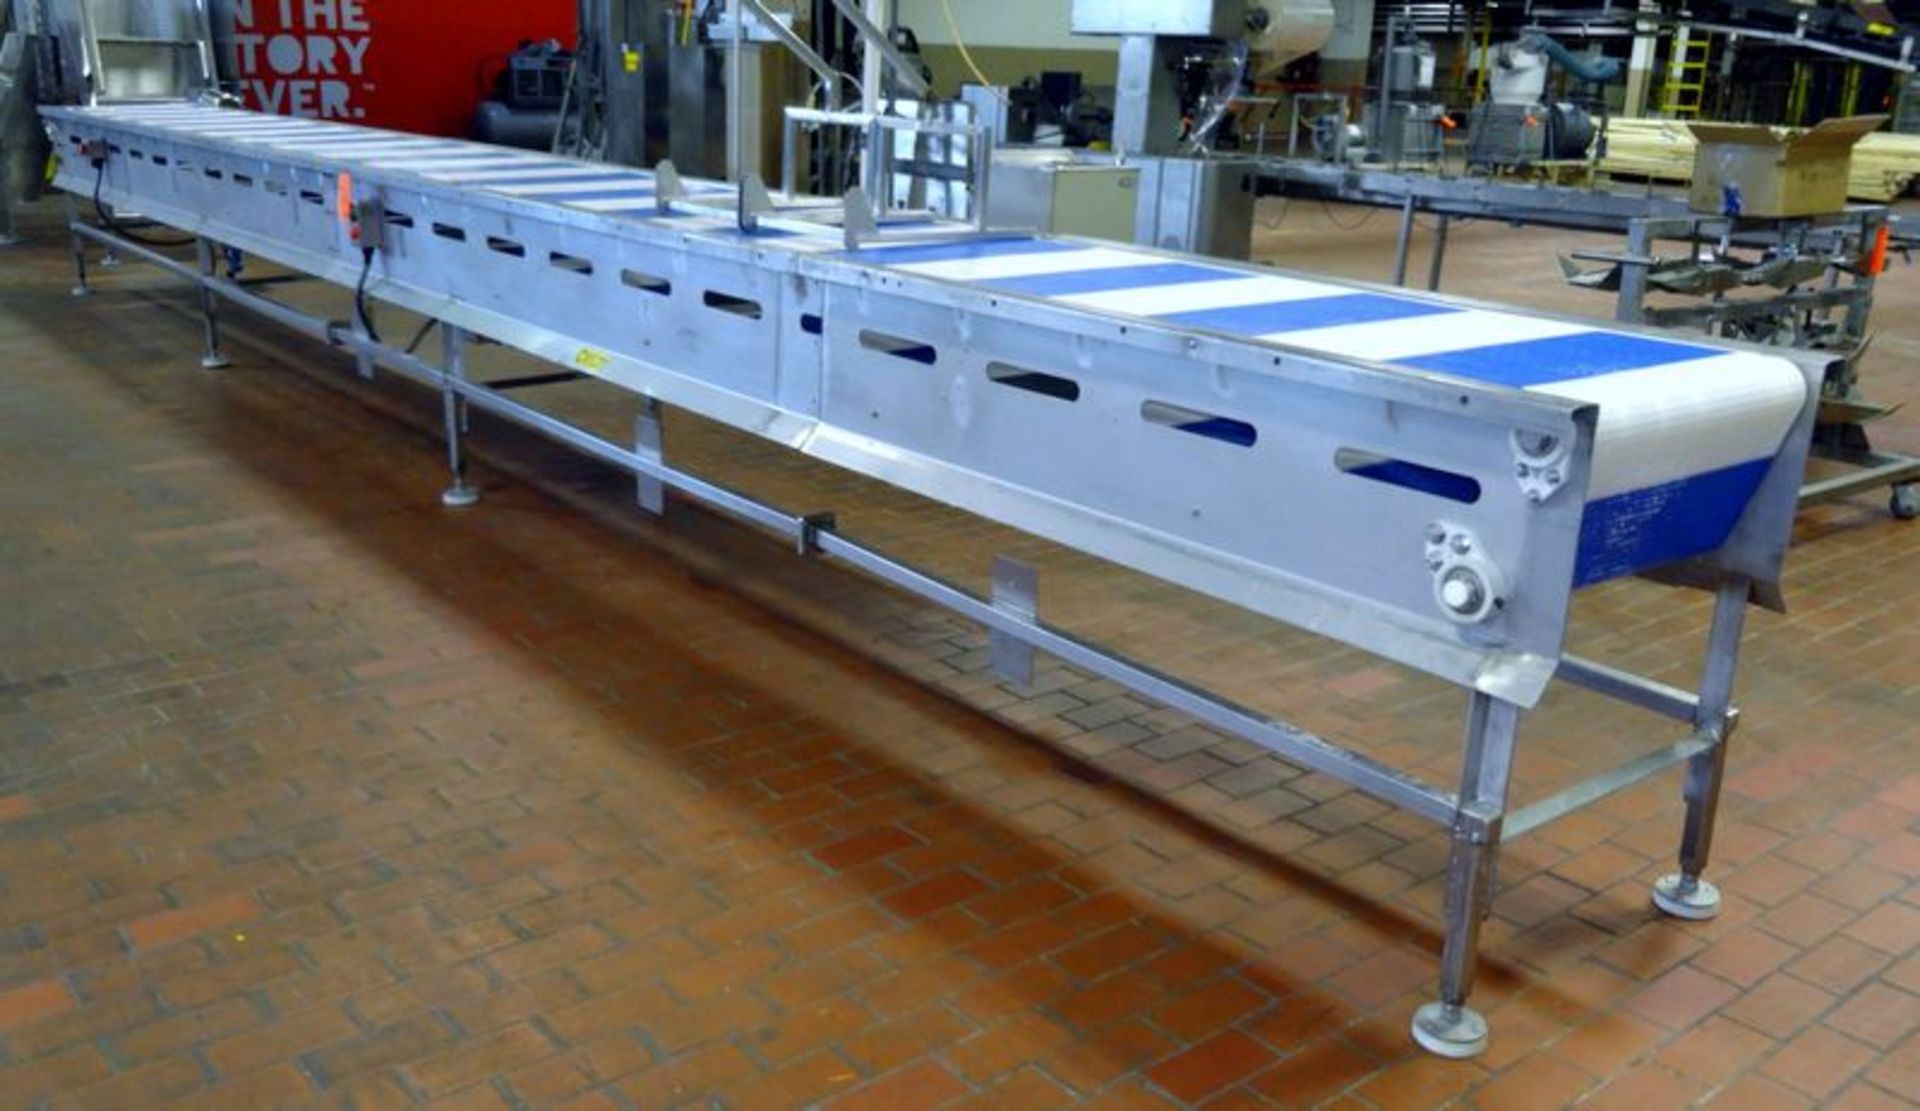 E-Quip plastic belt conveyor. Approximate 24" wide x 30' long. Stainless steel frame with motor. - Image 3 of 6